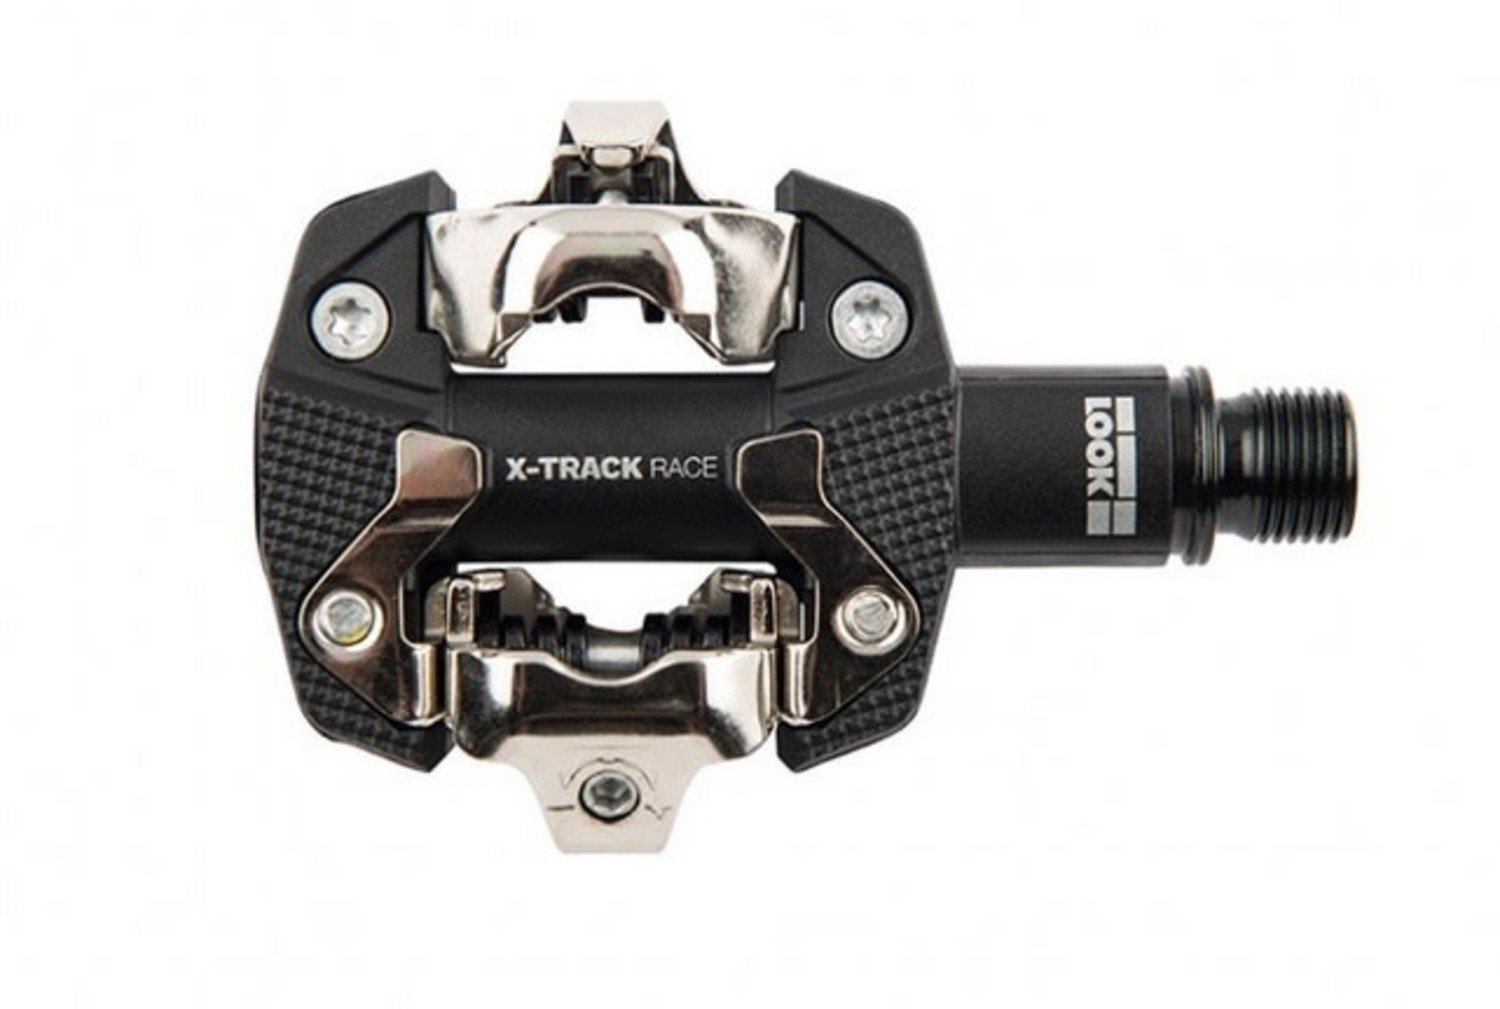 Look X-Track Race Pedals Composite/CroMo